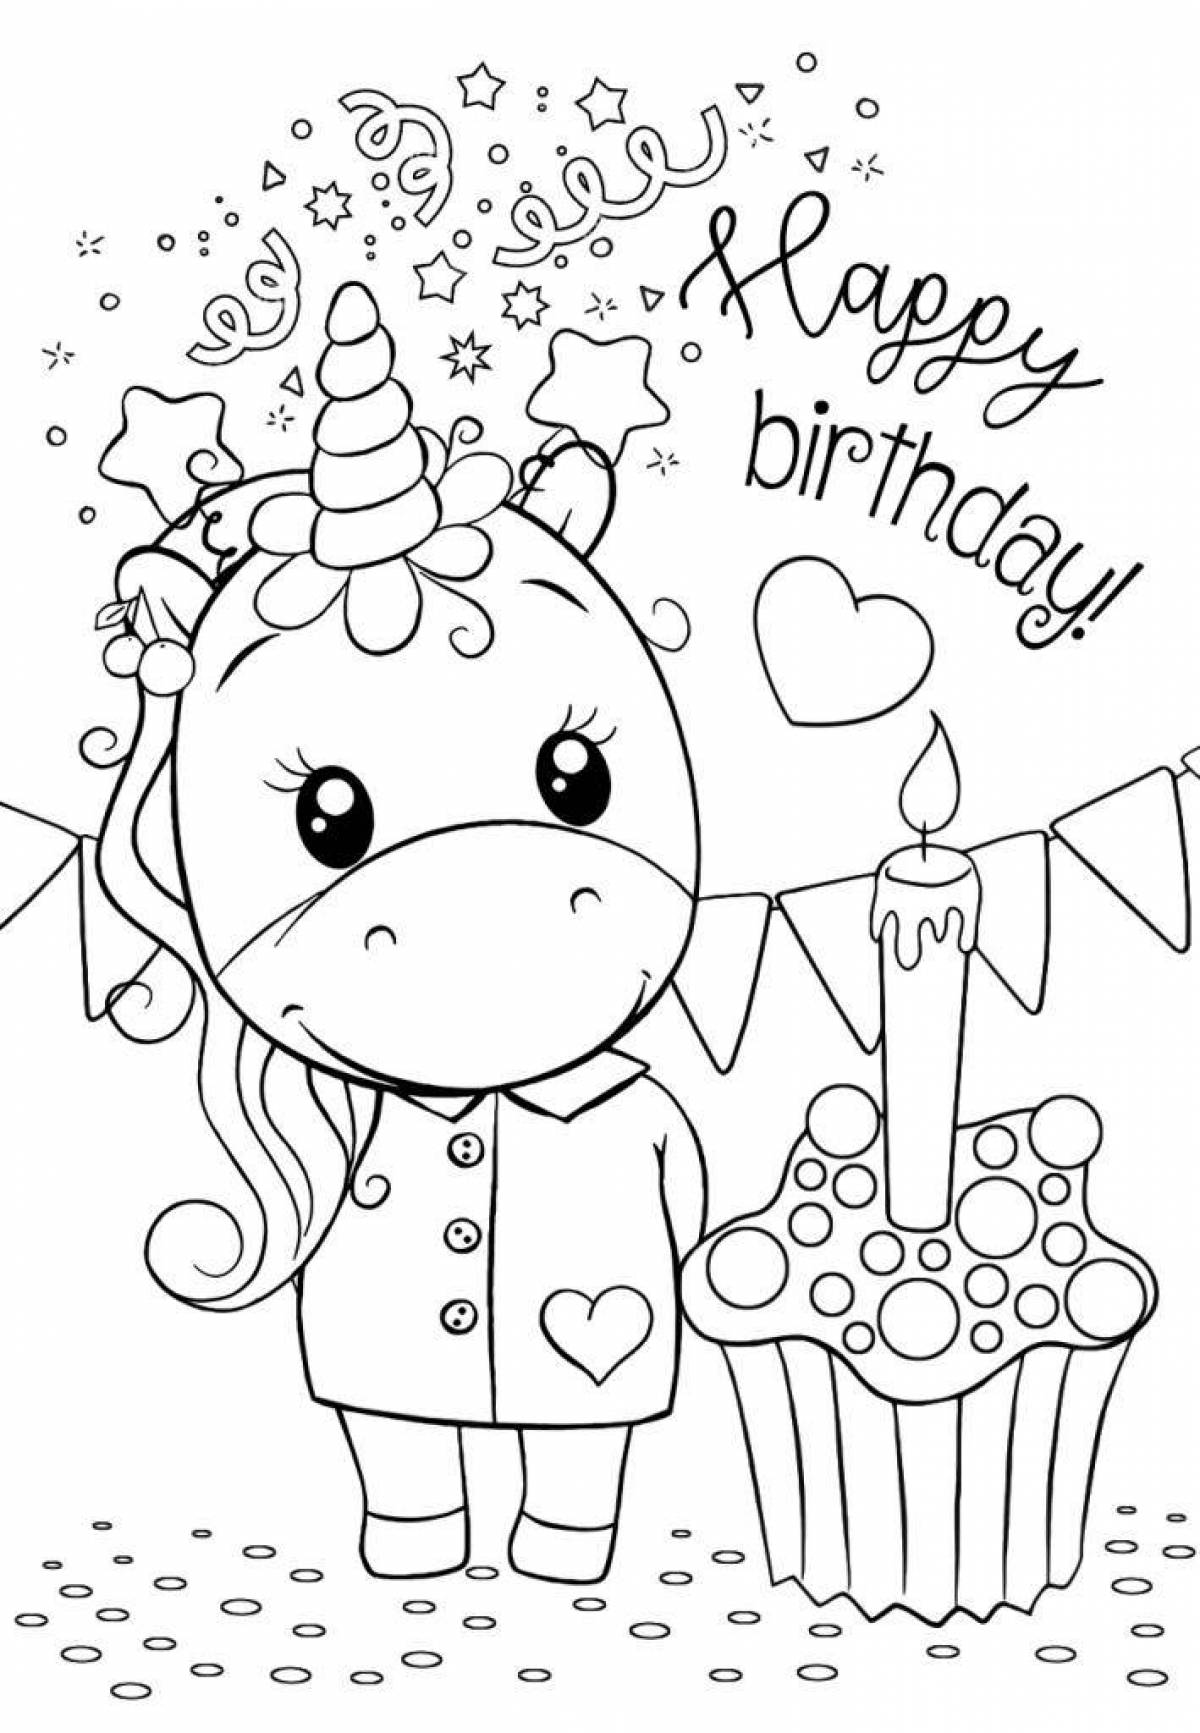 Happy birthday themed coloring book